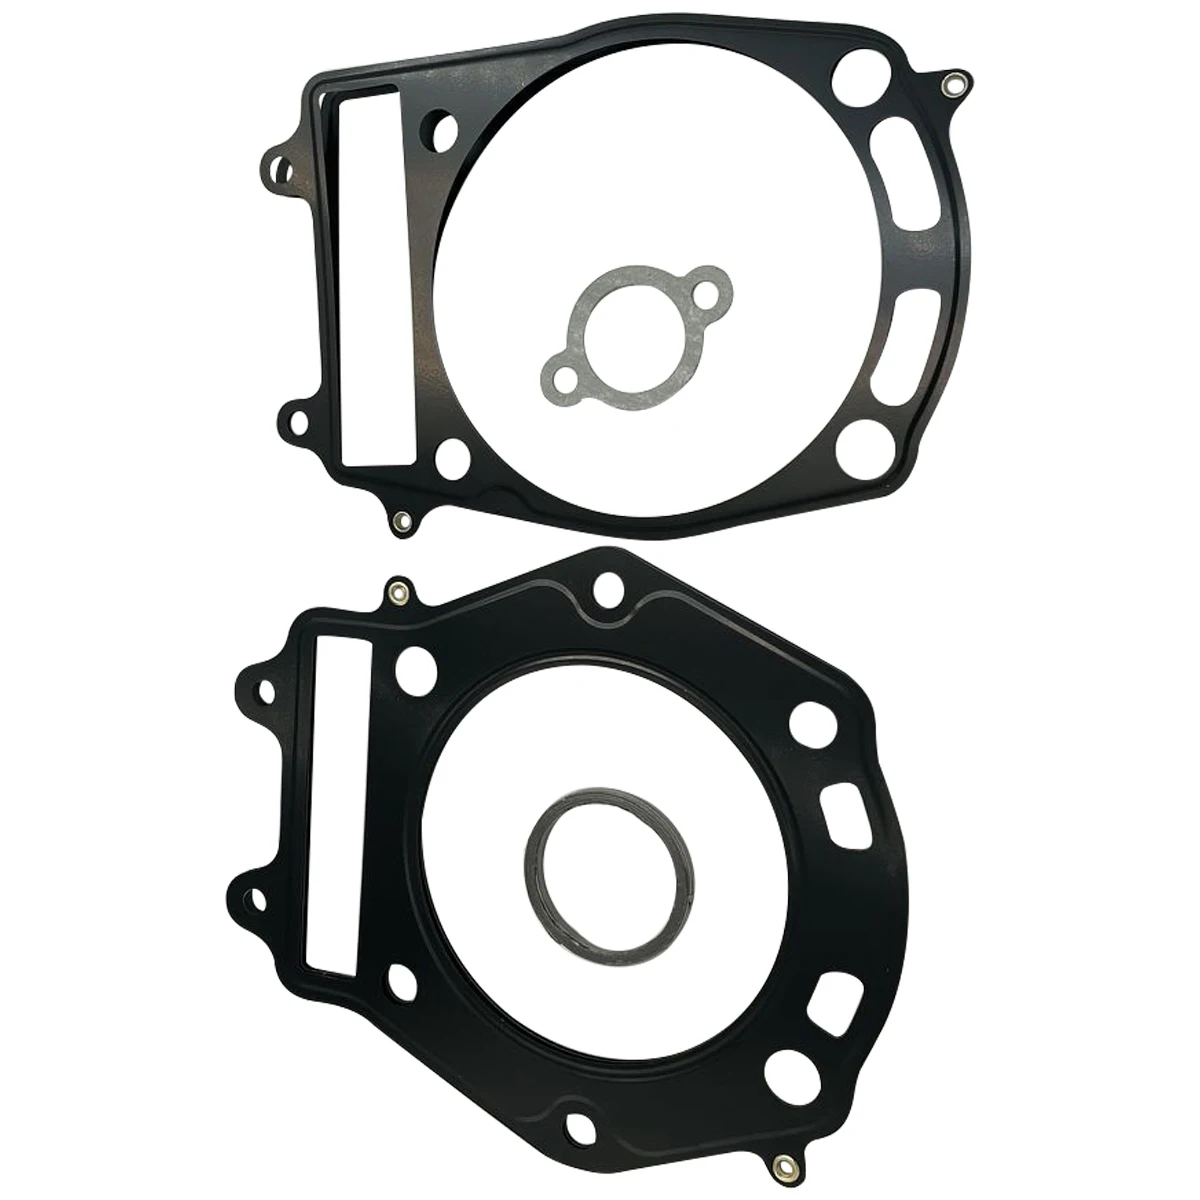 Motorcycle Crankcase Covers Cylinder Head Base Gasket Kits For Suzuki  DR650SE 1996-2021 AliExpress